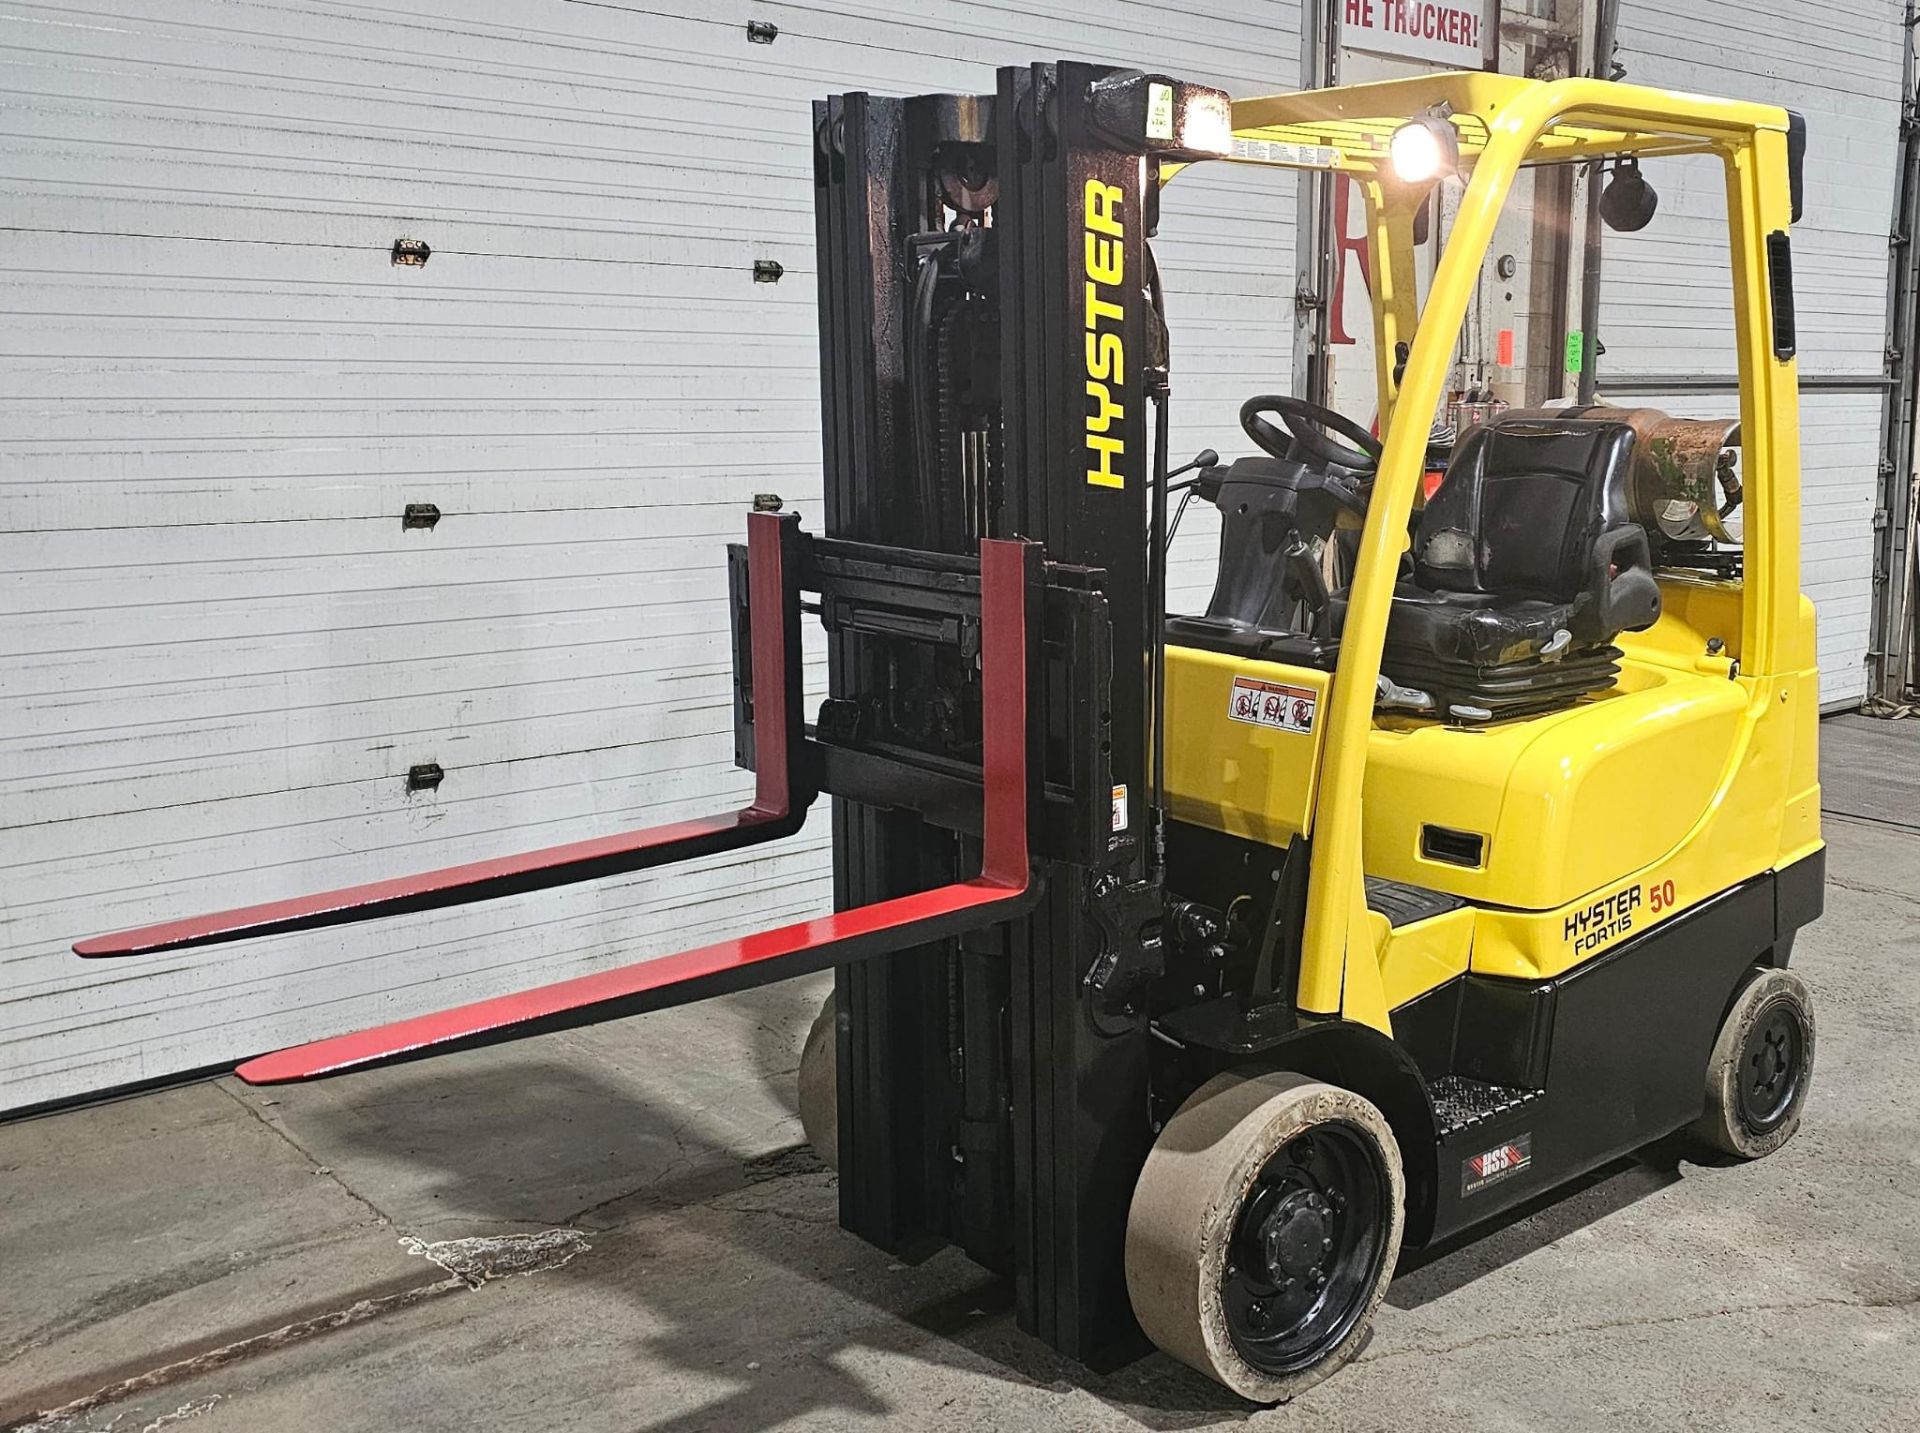 2015 Hyster 5,000lbs Capacity LPG (Propane) Forklift with sideshift & 3-STAGE MAST & Non marking - Bild 2 aus 3